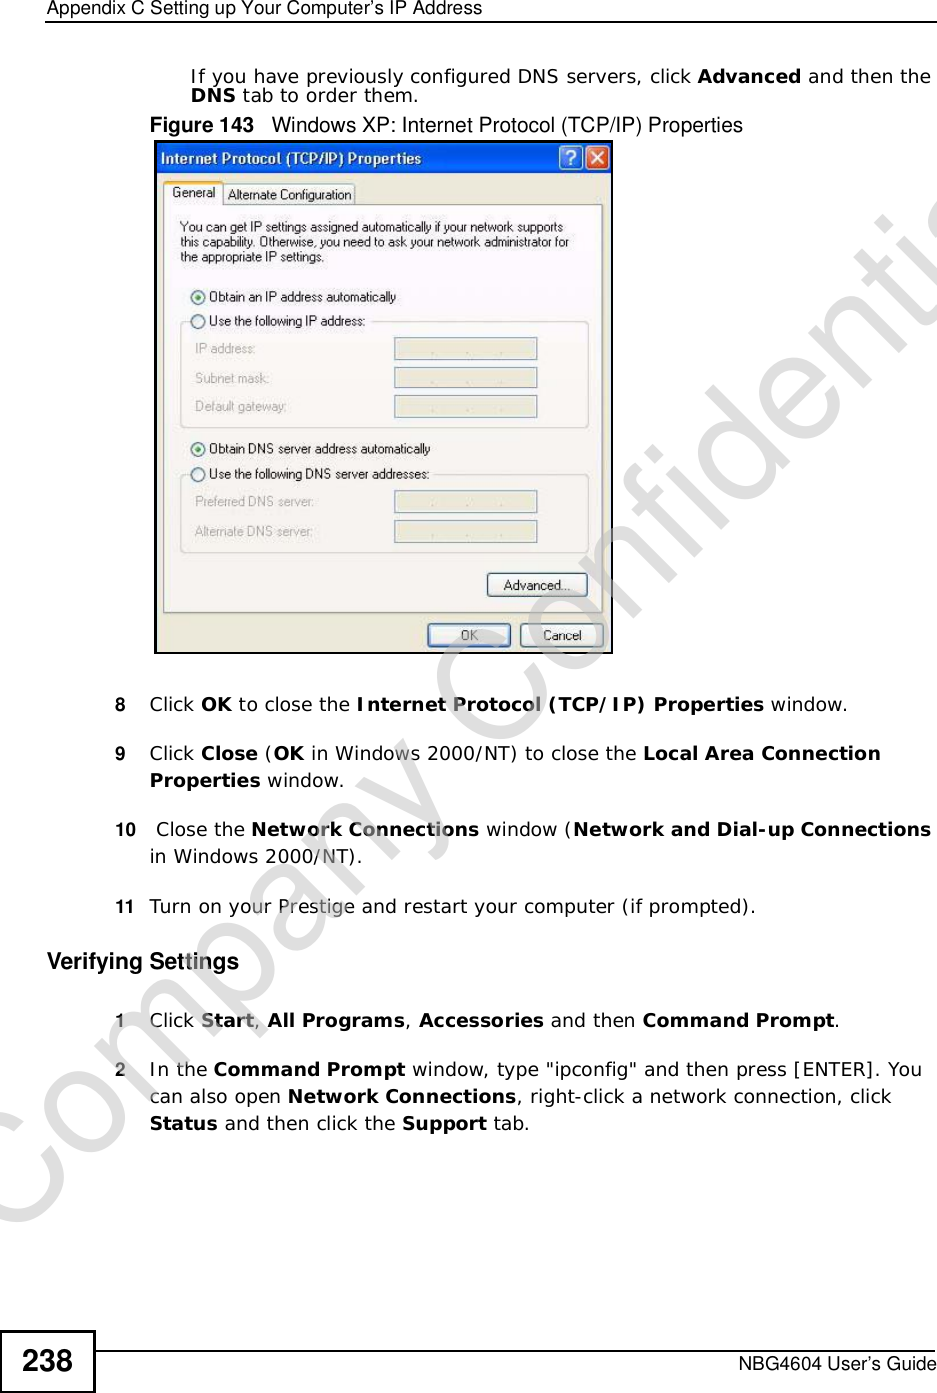 Appendix CSetting up Your Computer’s IP AddressNBG4604 User’s Guide238If you have previously configured DNS servers, click Advanced and then the DNS tab to order them.Figure 143   Windows XP: Internet Protocol (TCP/IP) Properties8Click OK to close the Internet Protocol (TCP/IP) Properties window.9Click Close (OK in Windows 2000/NT) to close the Local Area Connection Properties window.10  Close the Network Connections window (Network and Dial-up Connections in Windows 2000/NT).11 Turn on your Prestige and restart your computer (if prompted).Verifying Settings1Click Start,All Programs,Accessories and then Command Prompt.2In the Command Prompt window, type &quot;ipconfig&quot; and then press [ENTER]. You can also open Network Connections, right-click a network connection, click Status and then click the Support tab.Company Confidential